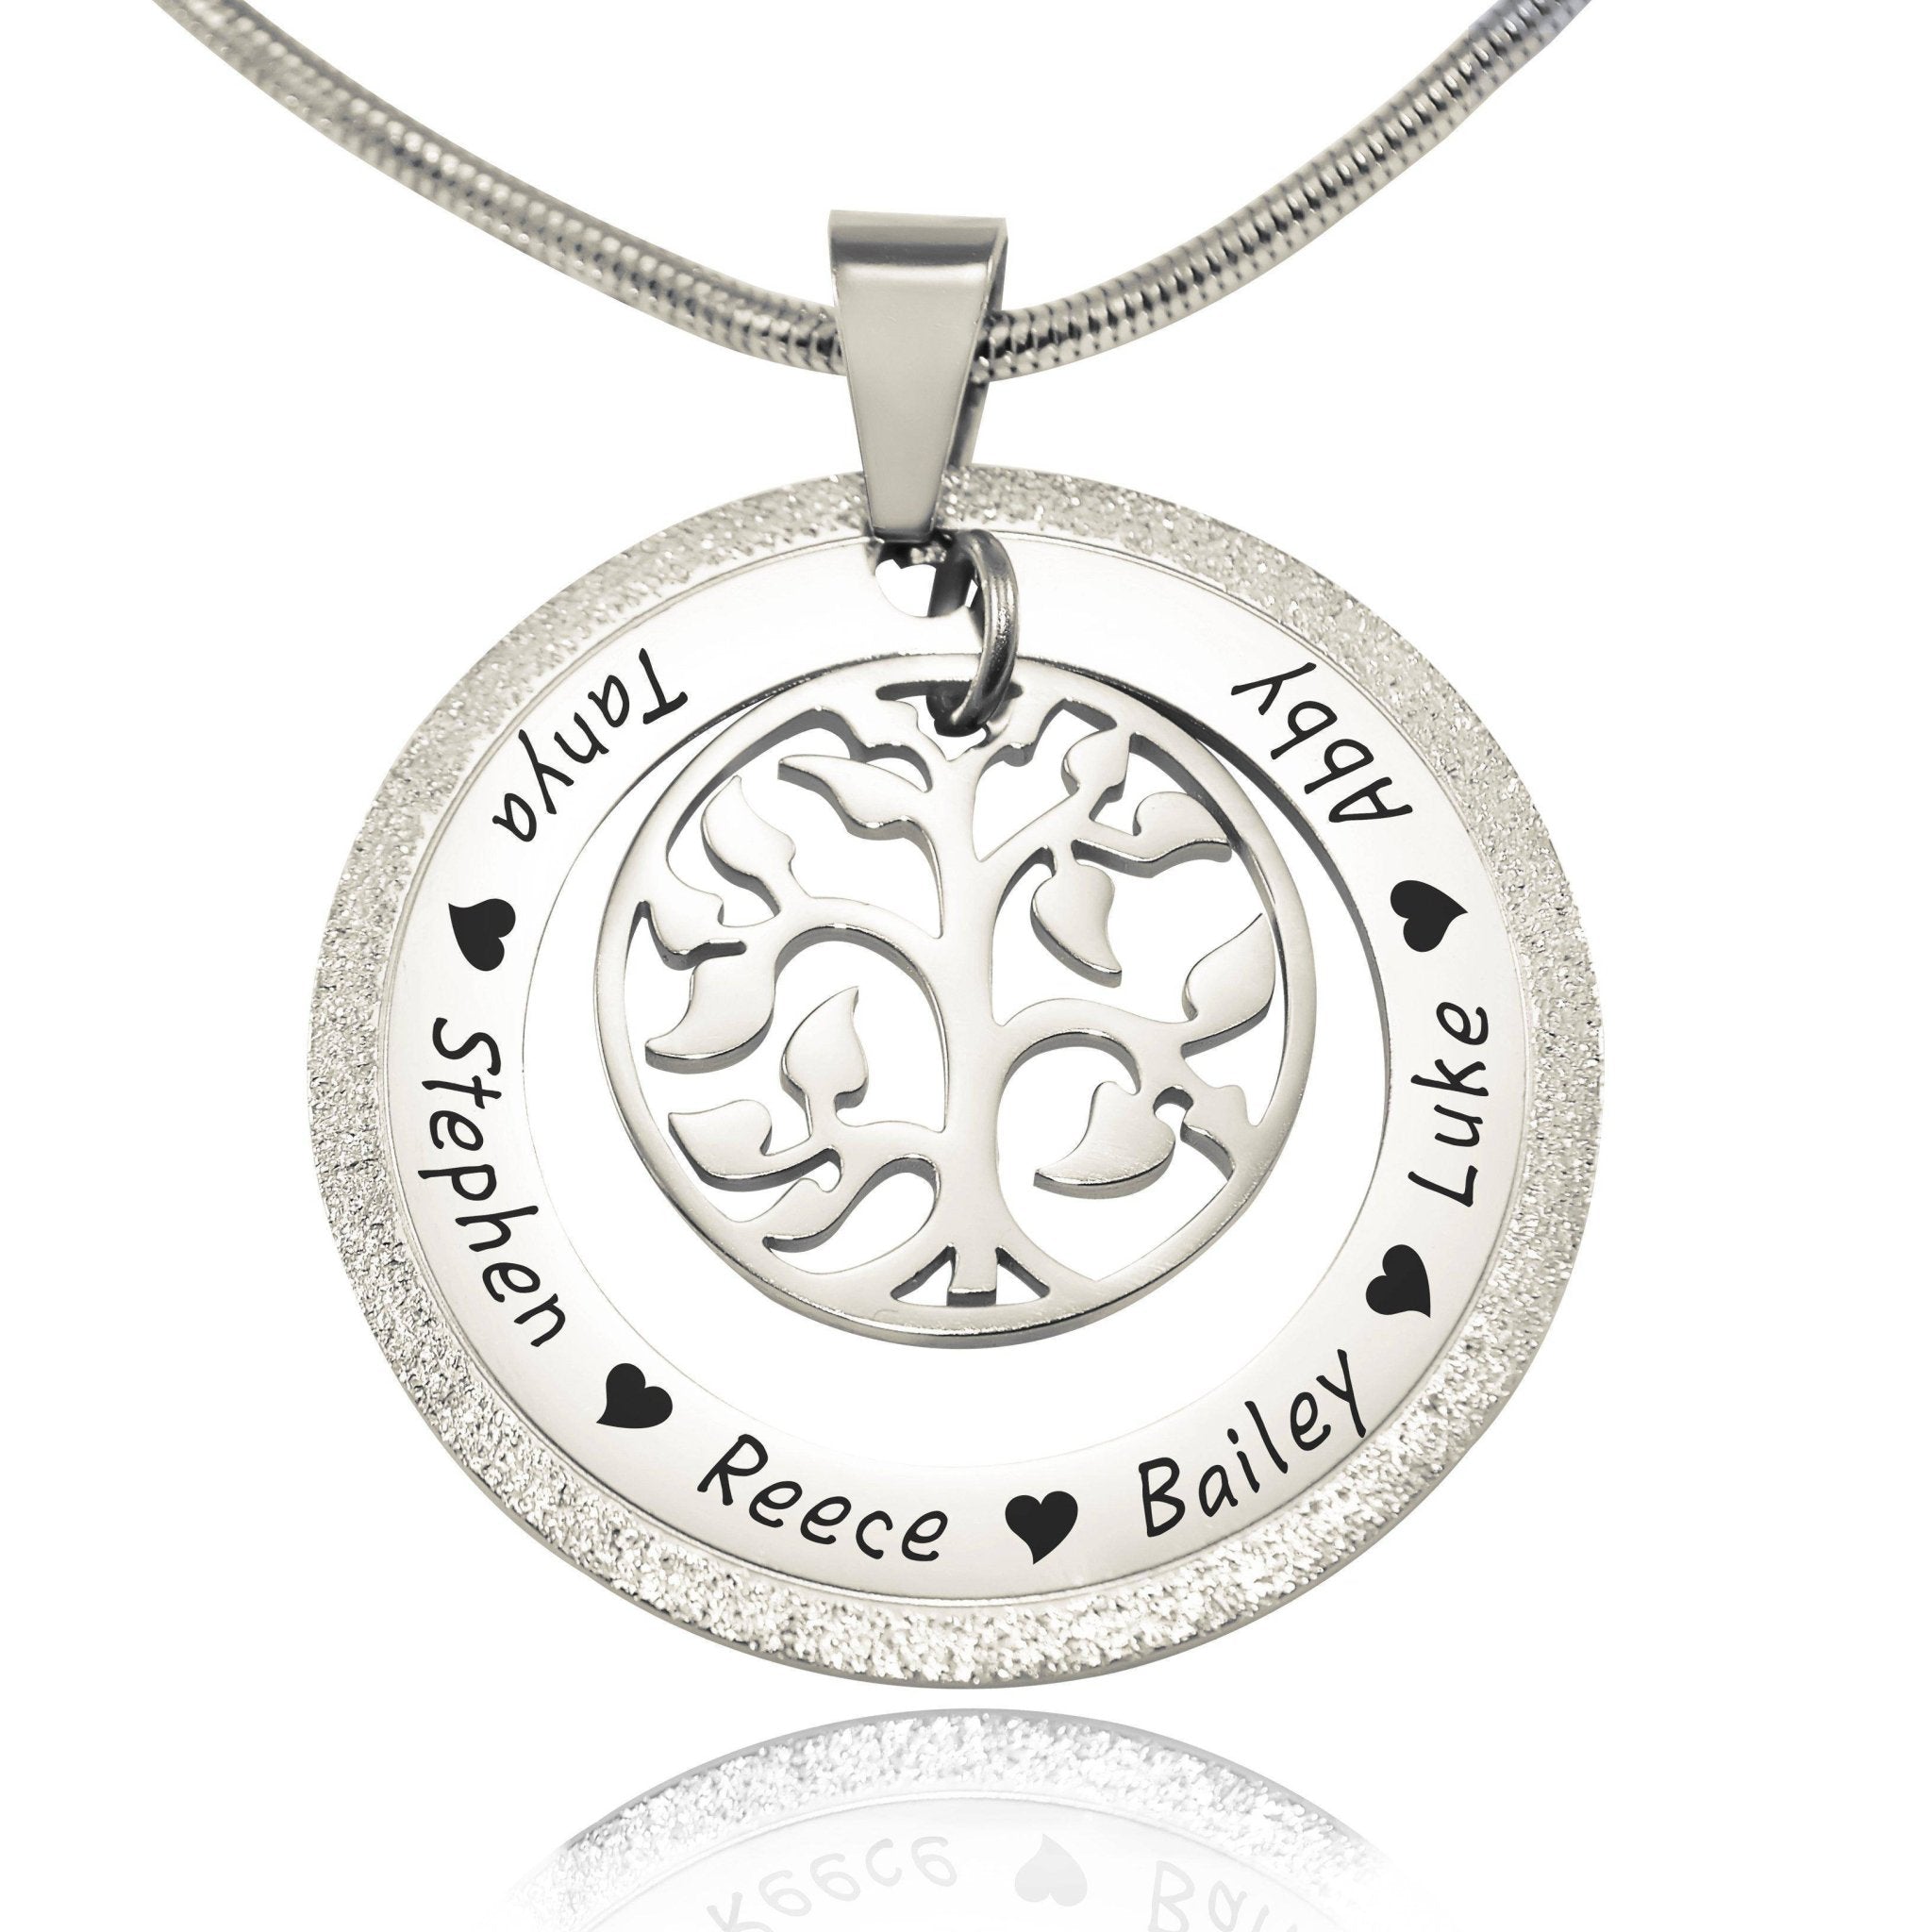 Sparkling My Family Tree Necklace - Family Tree Necklaces by Belle Fever